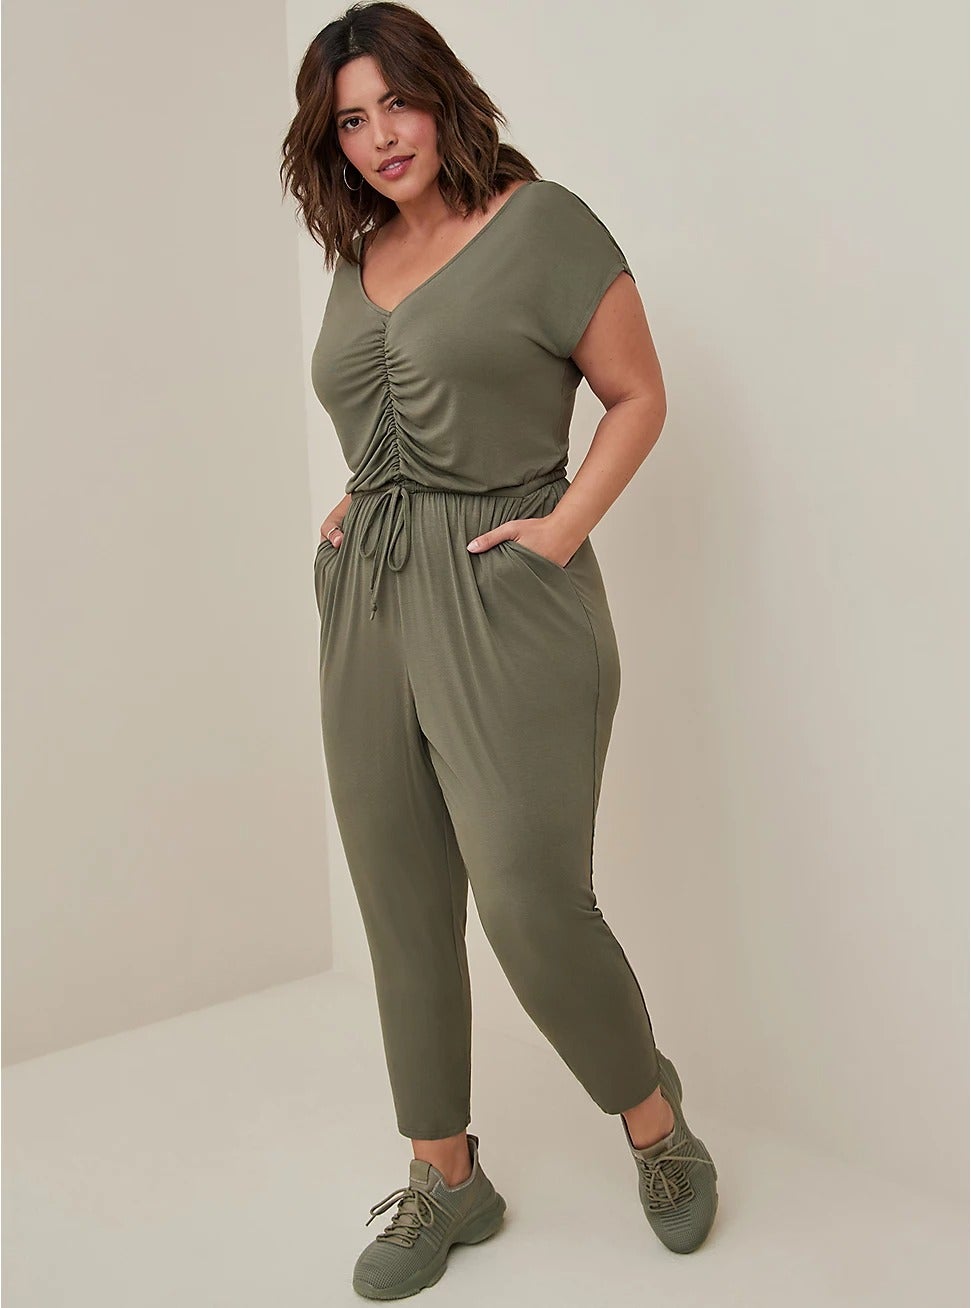 a model wearing the olive green jumpsuit